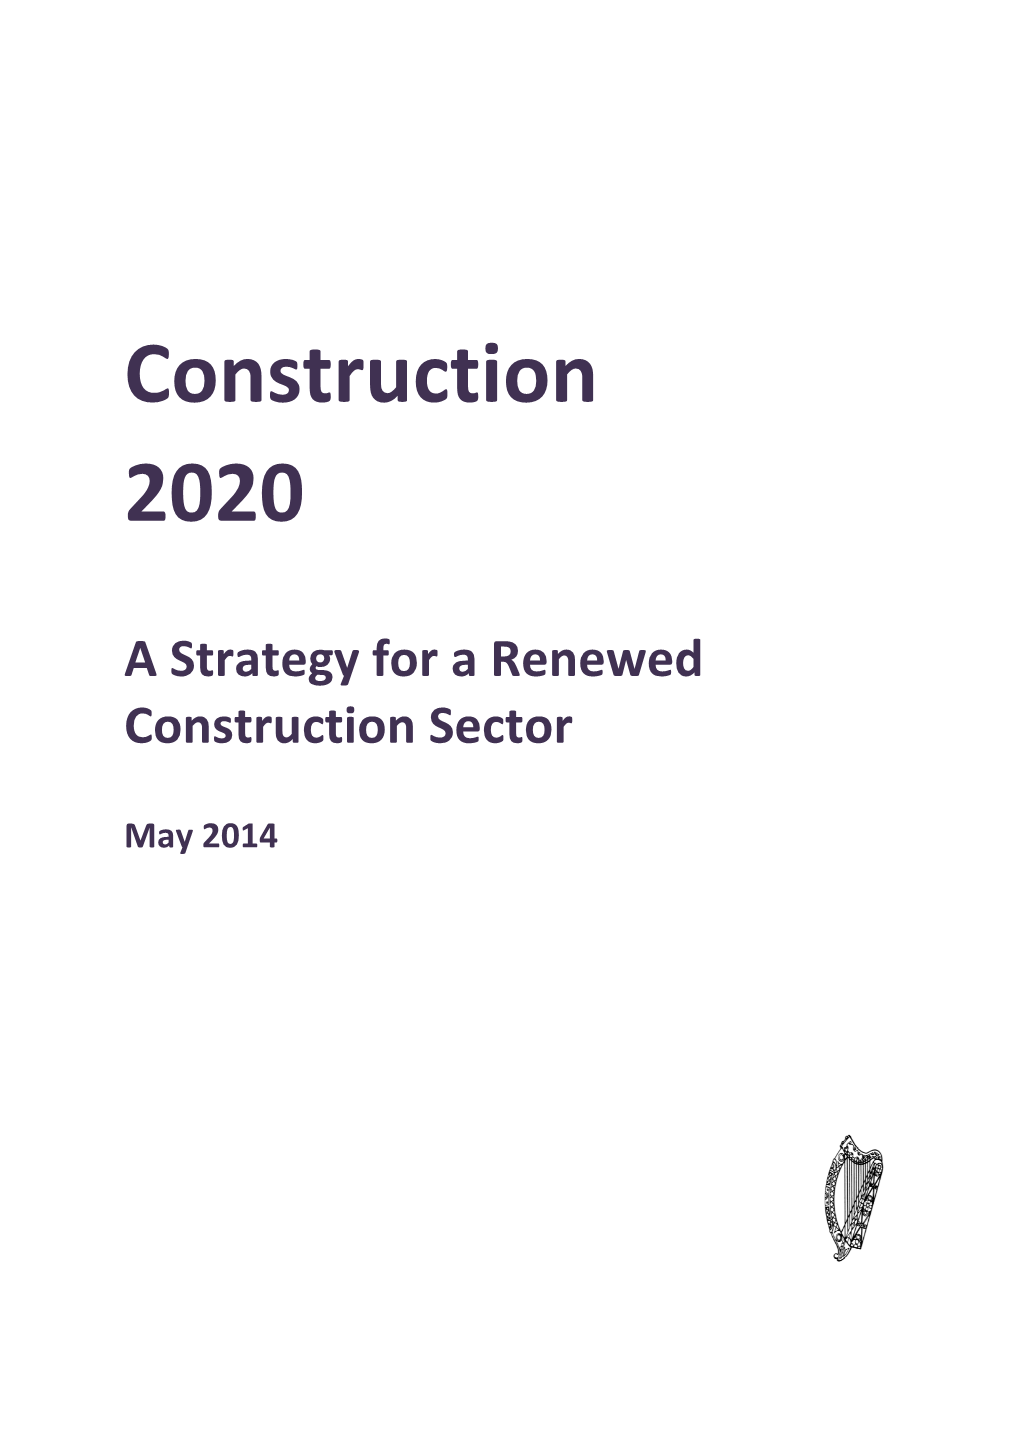 A Strategy for a Renewed Construction Sector